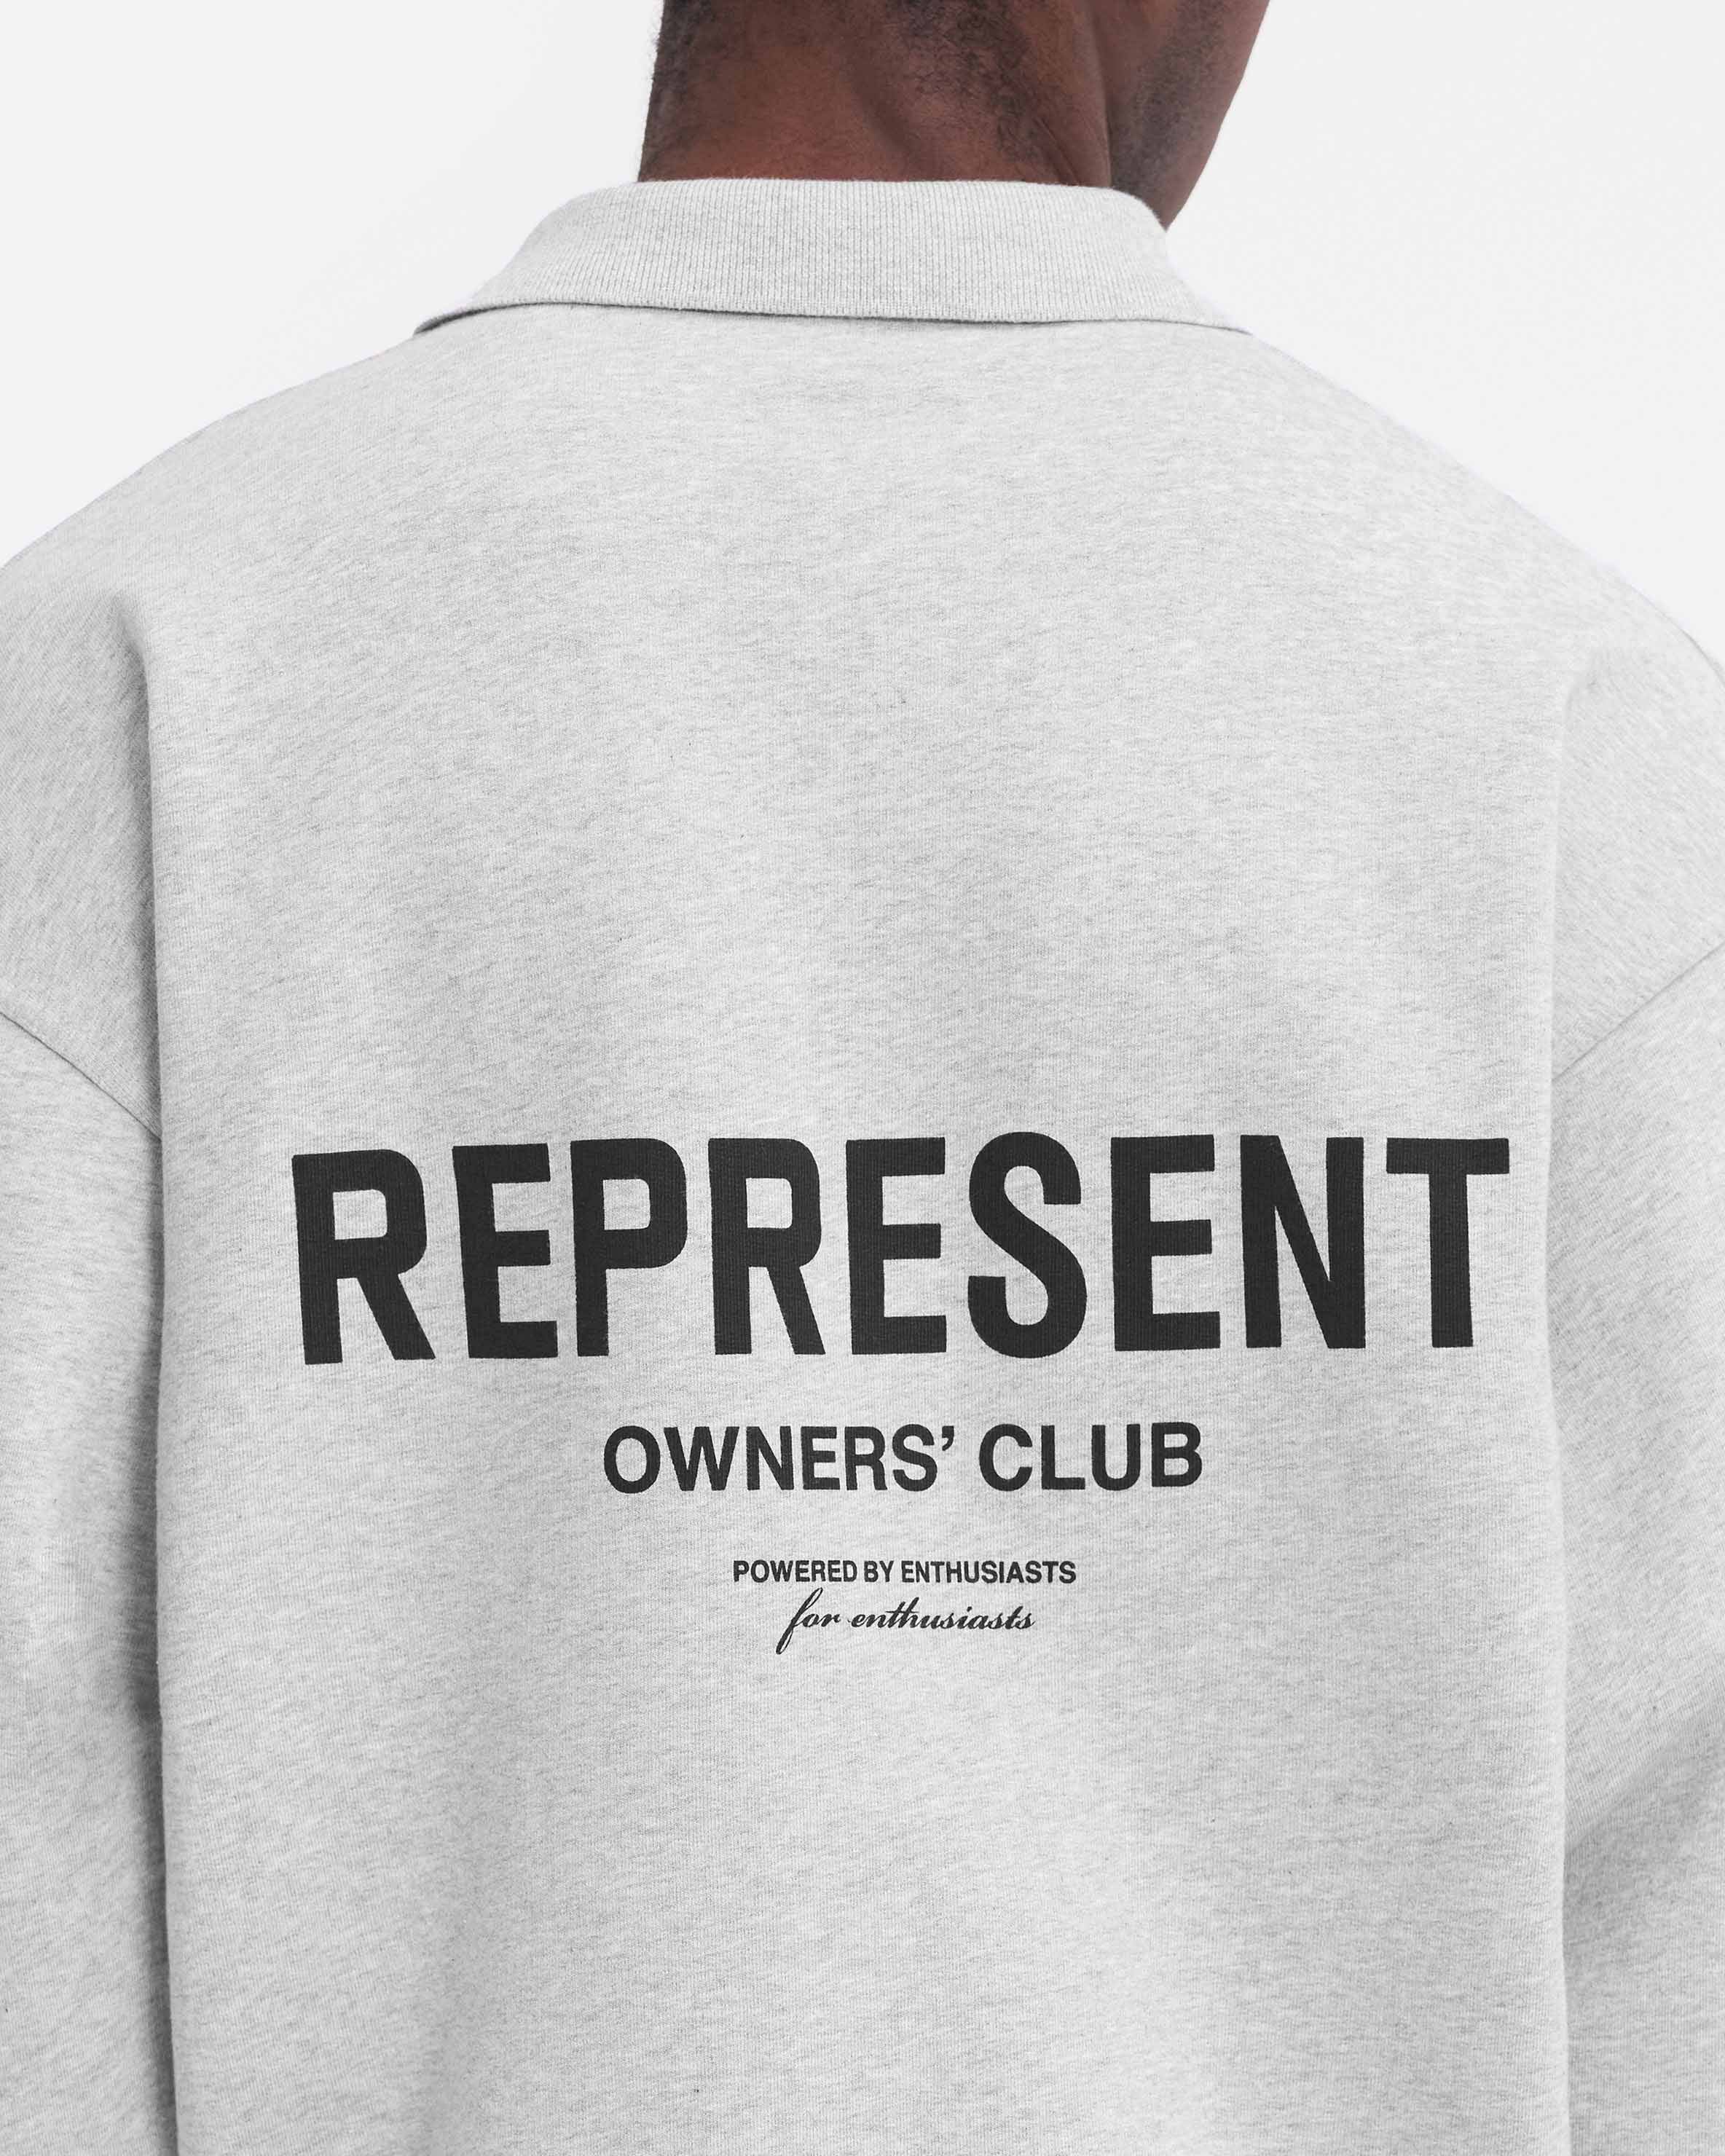 Represent Owners Club Long Sleeve Polo Sweater - Ash Grey